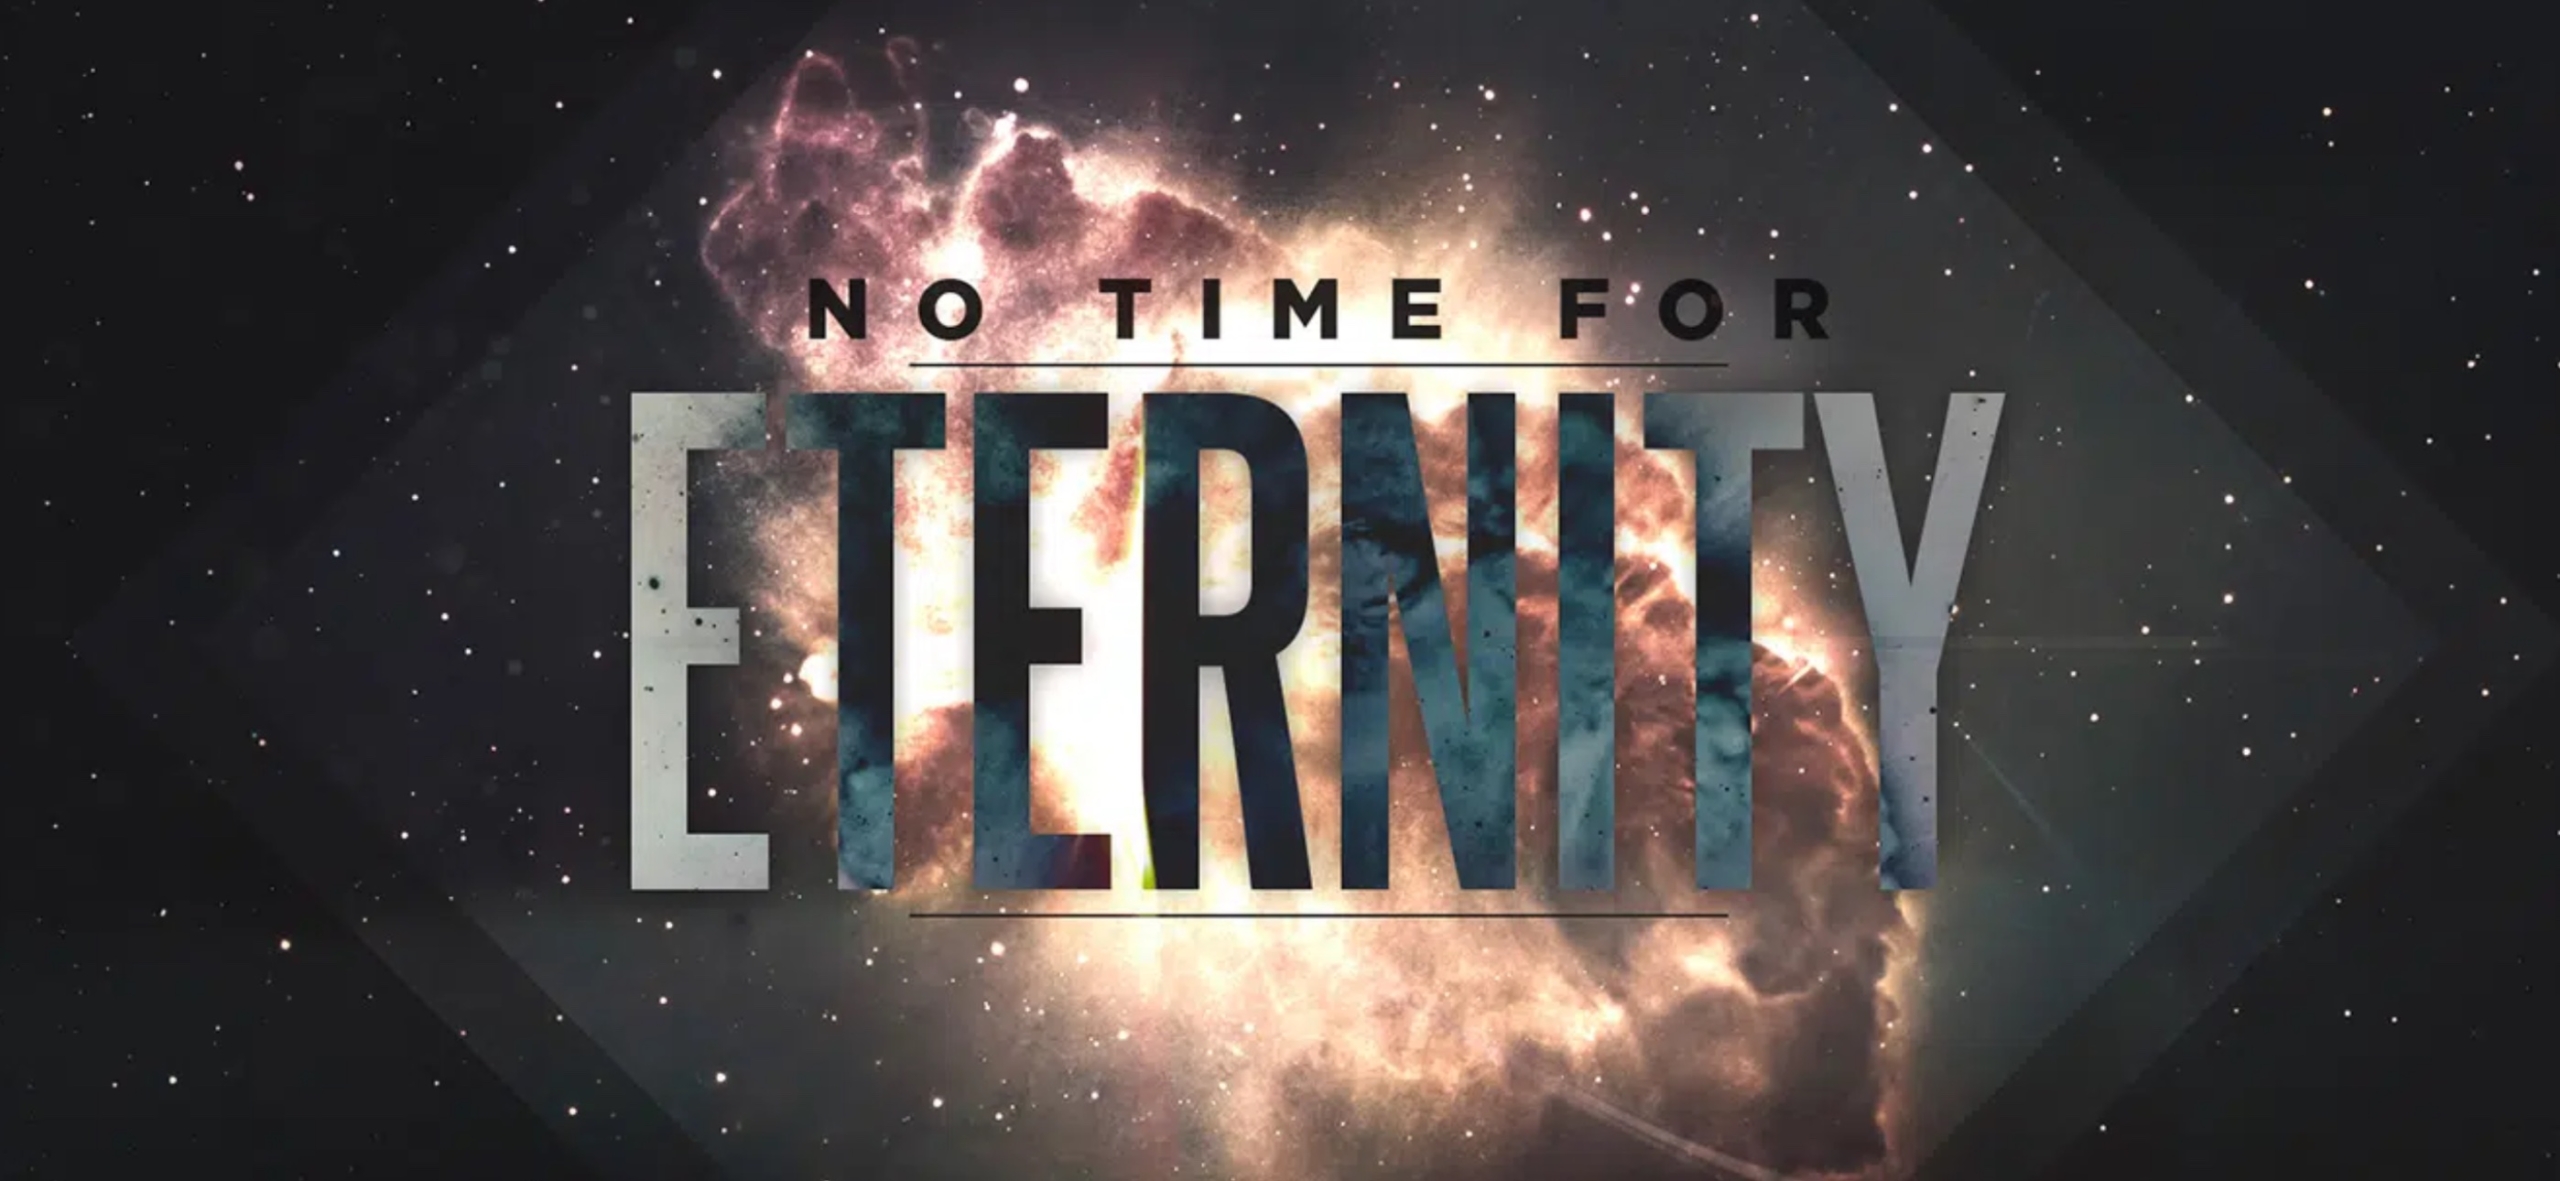 Eternity: A Day of Fulfilled Promises